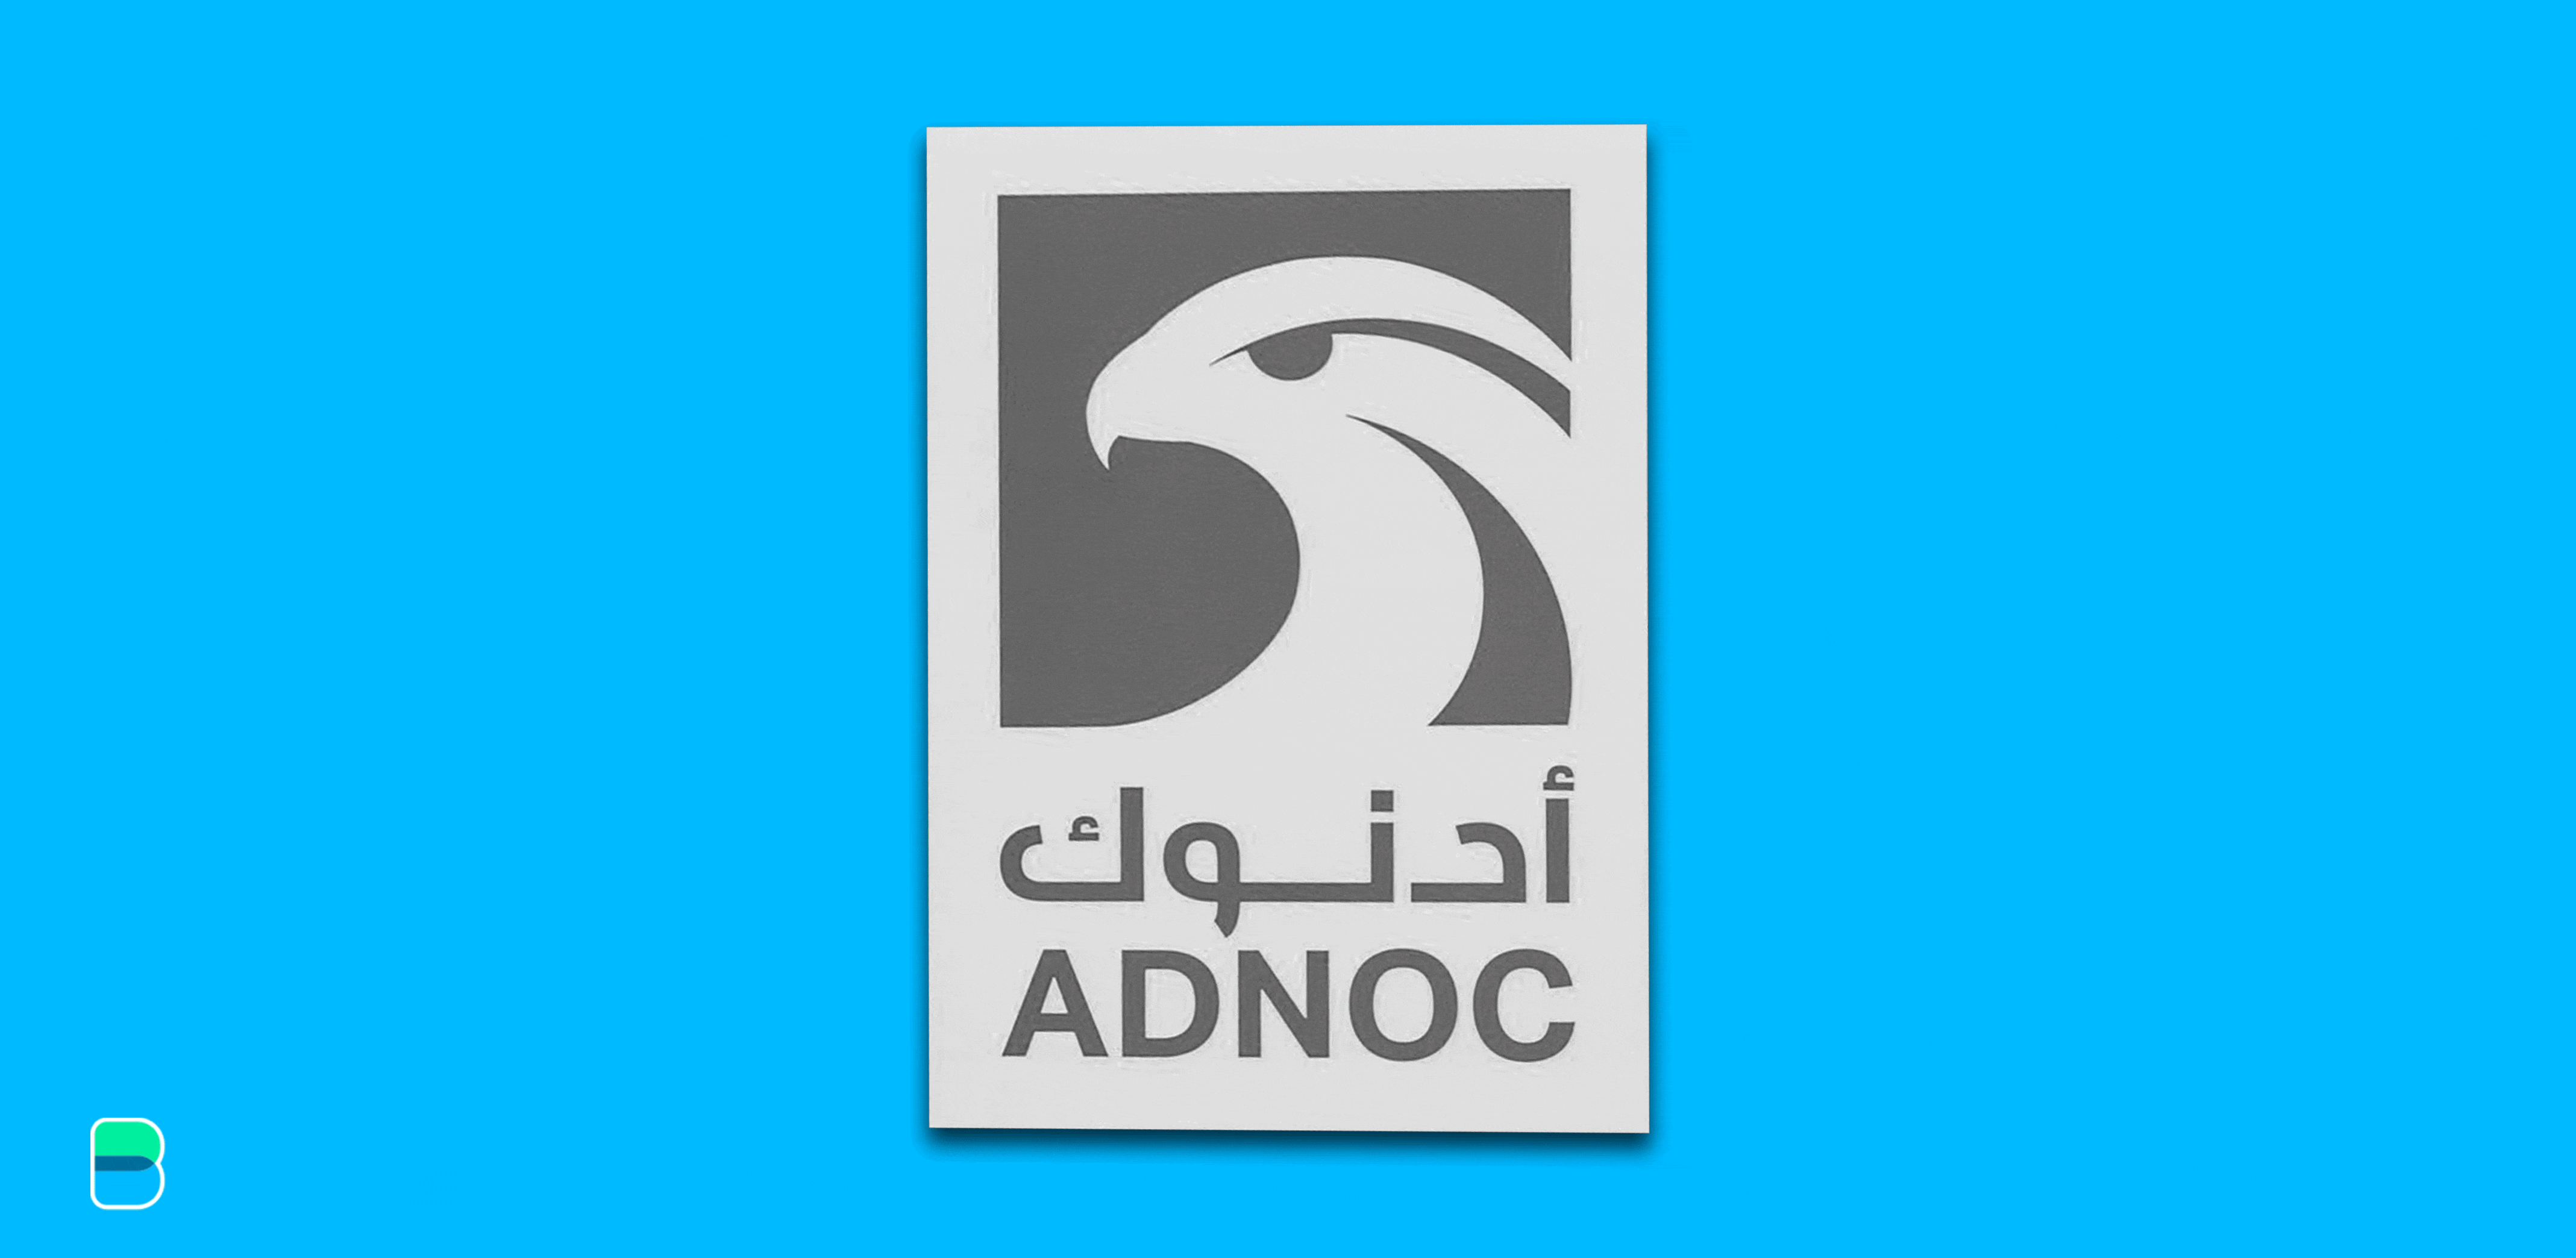 ADNOC Drilling is asking for $0.62 a pop